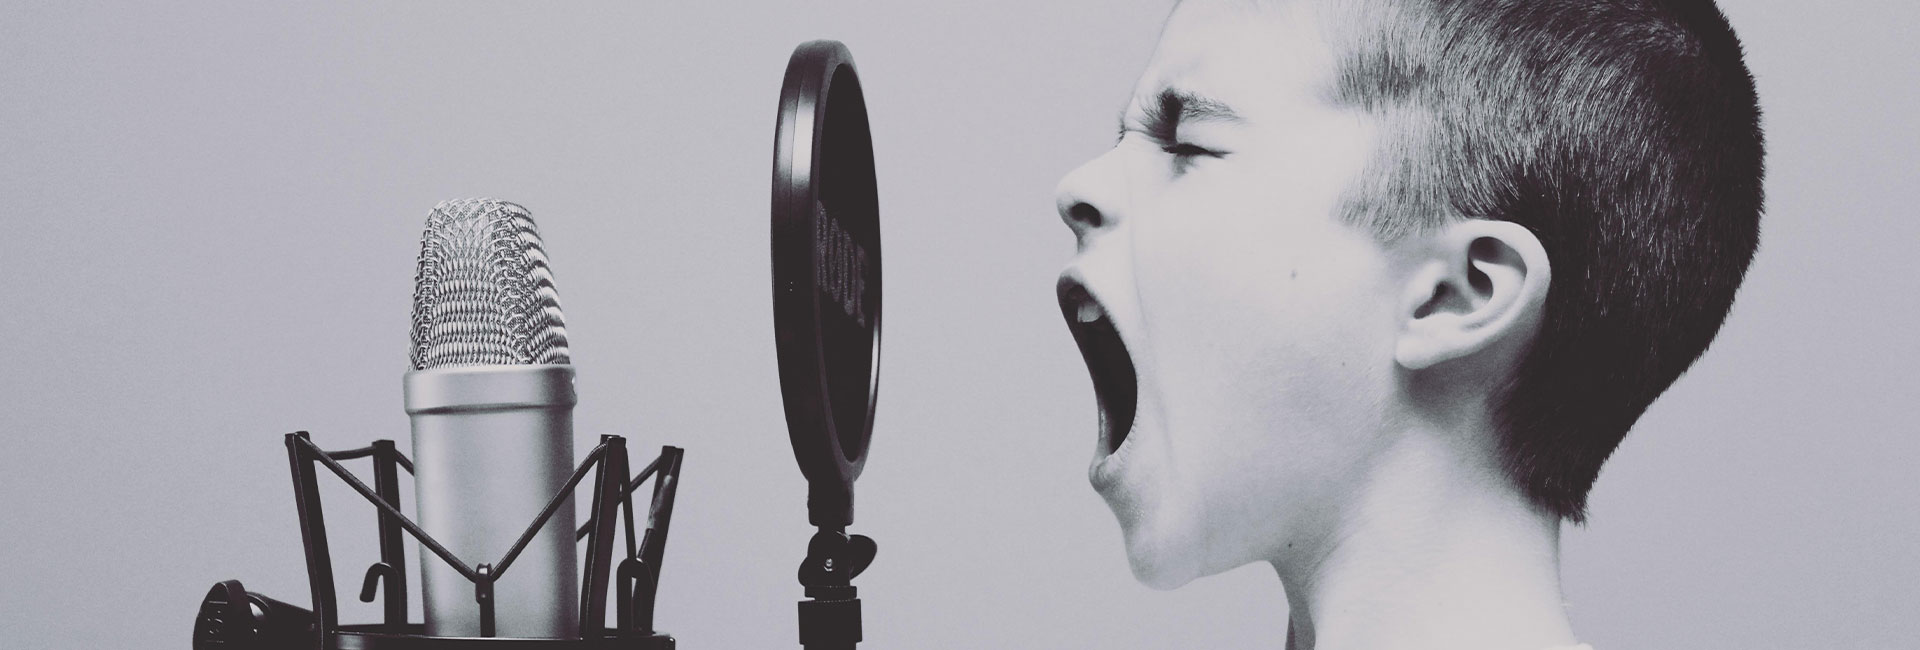 boy-shouting-into-microphone